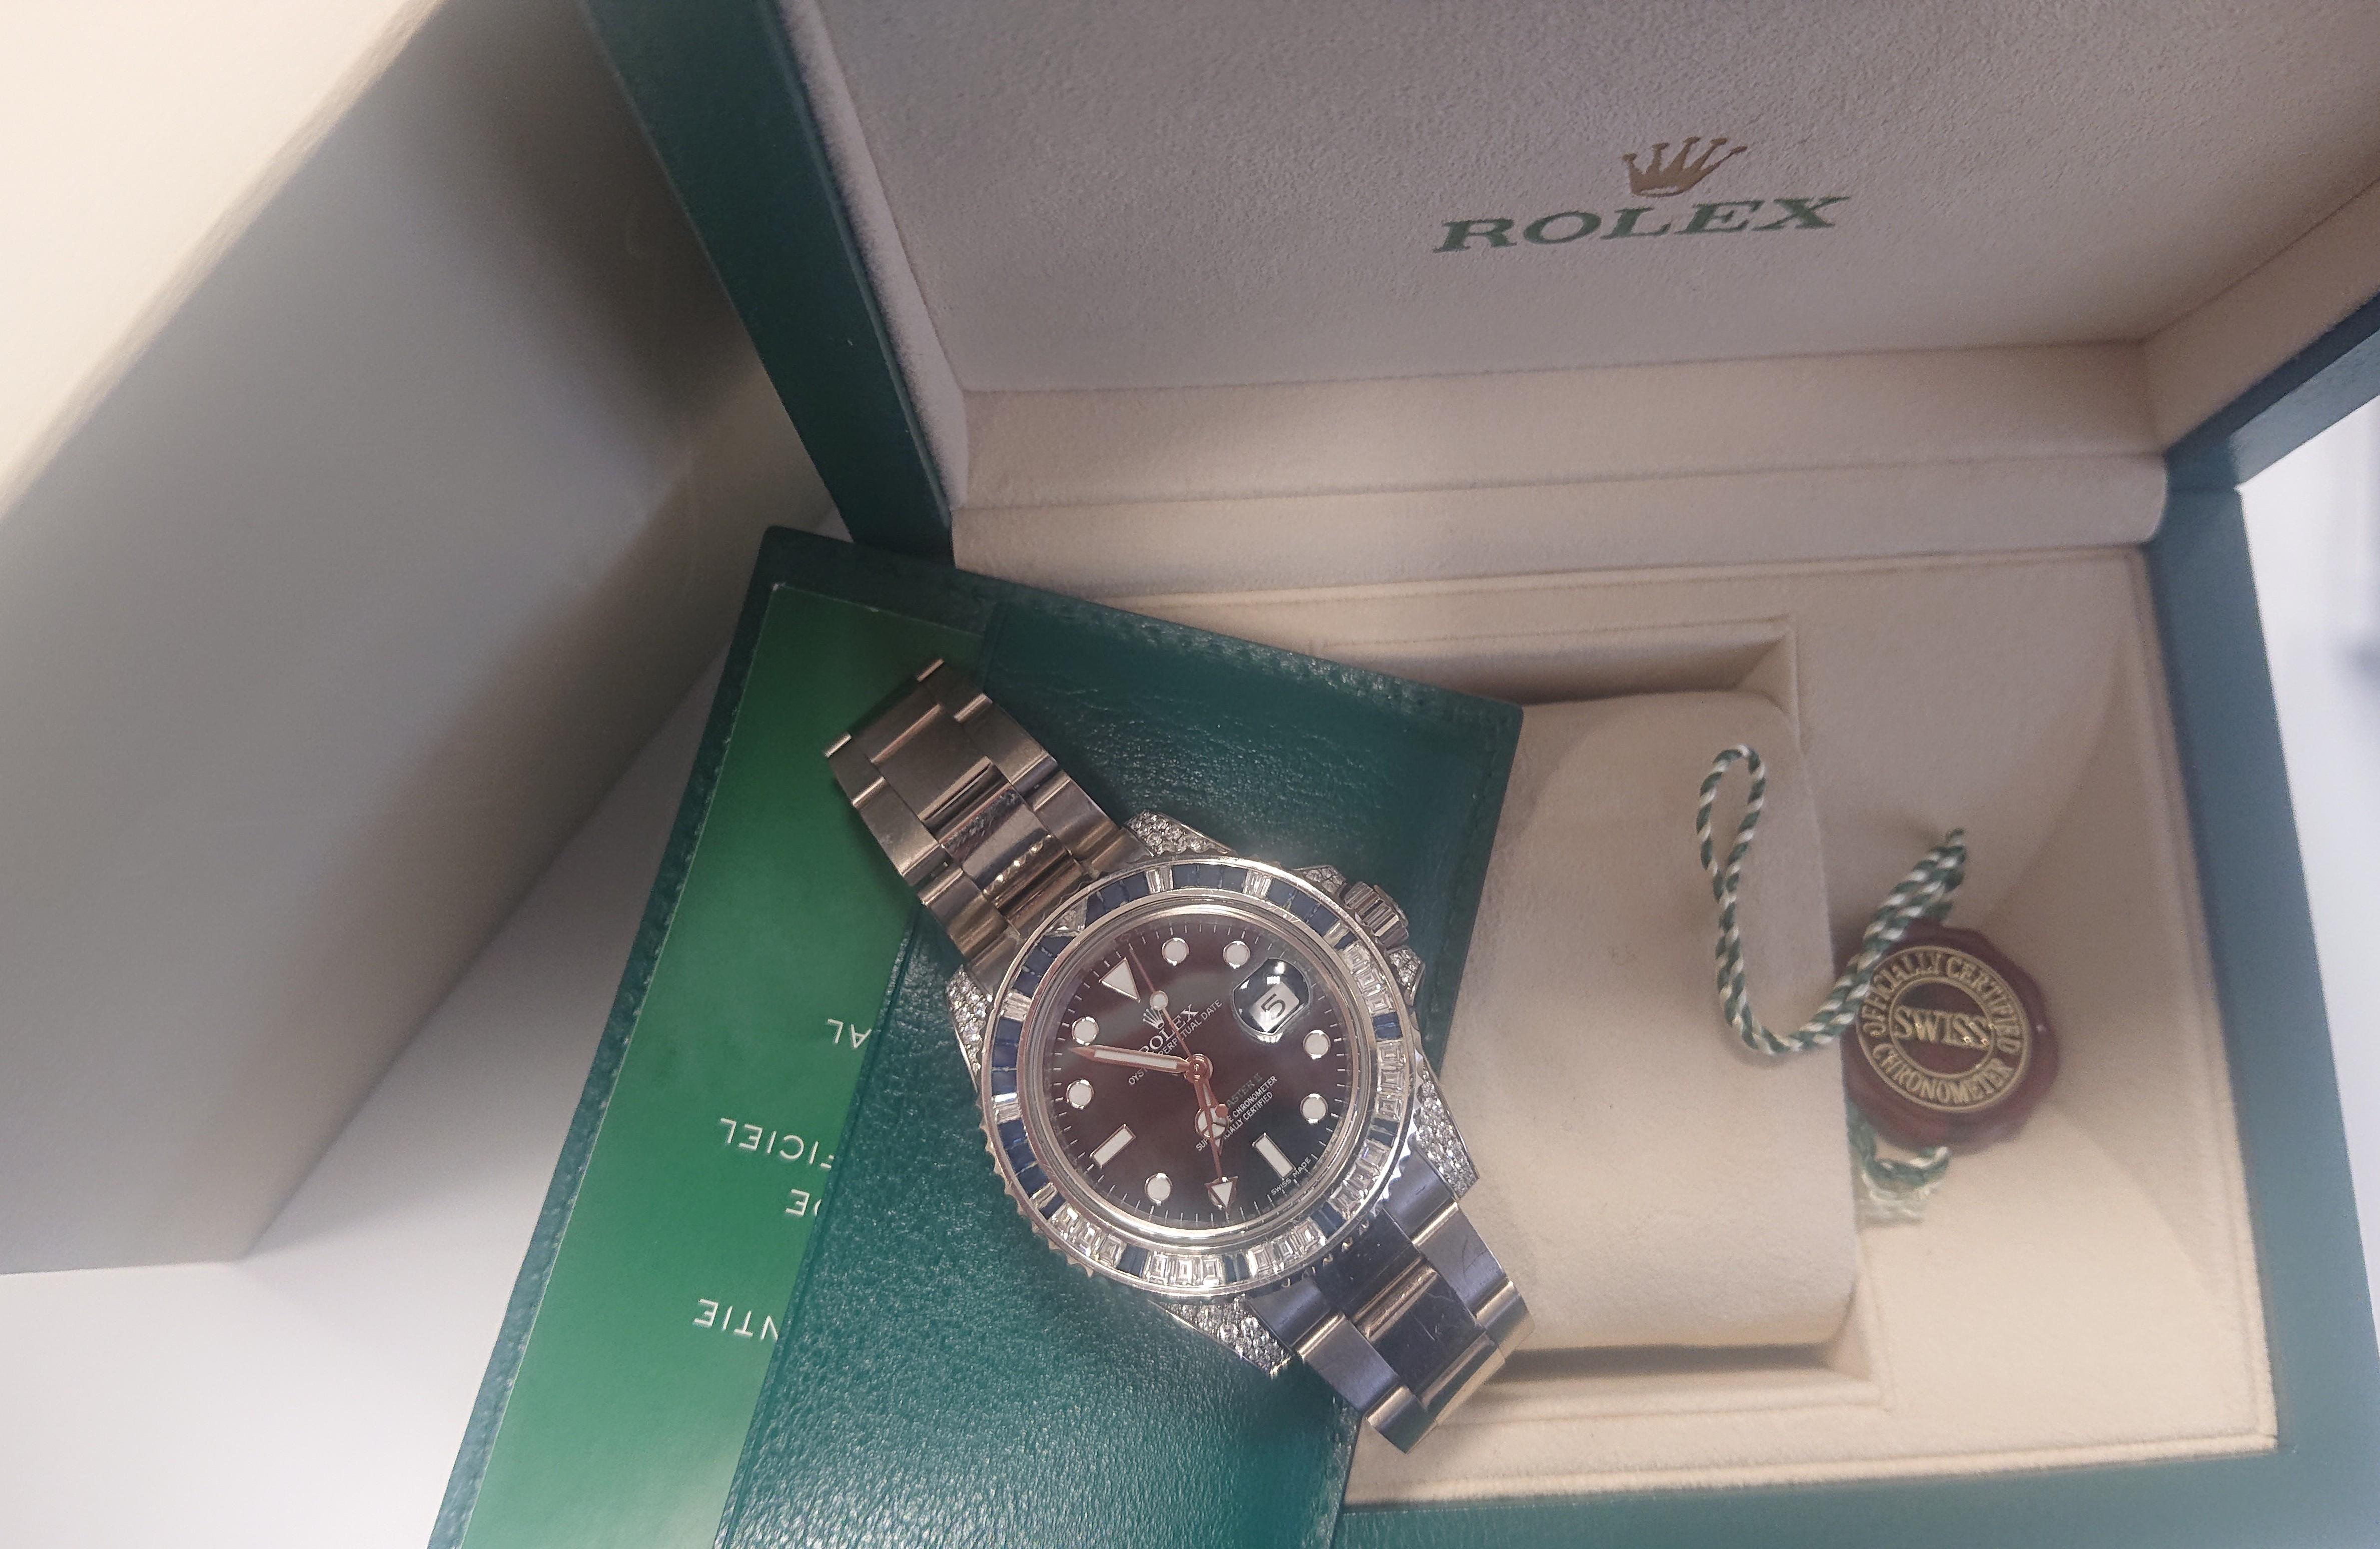 Rolex GMT Master II White Gold Sapphire and Diamond Ref 116759 Wristwatch. Rolex Oyster Perpetual GMT-Master II Watch. 40mm diameter. 18ct white gold case set with diamonds and sapphires. Black dial with date and numbered 3MR66266. 18ct white gold